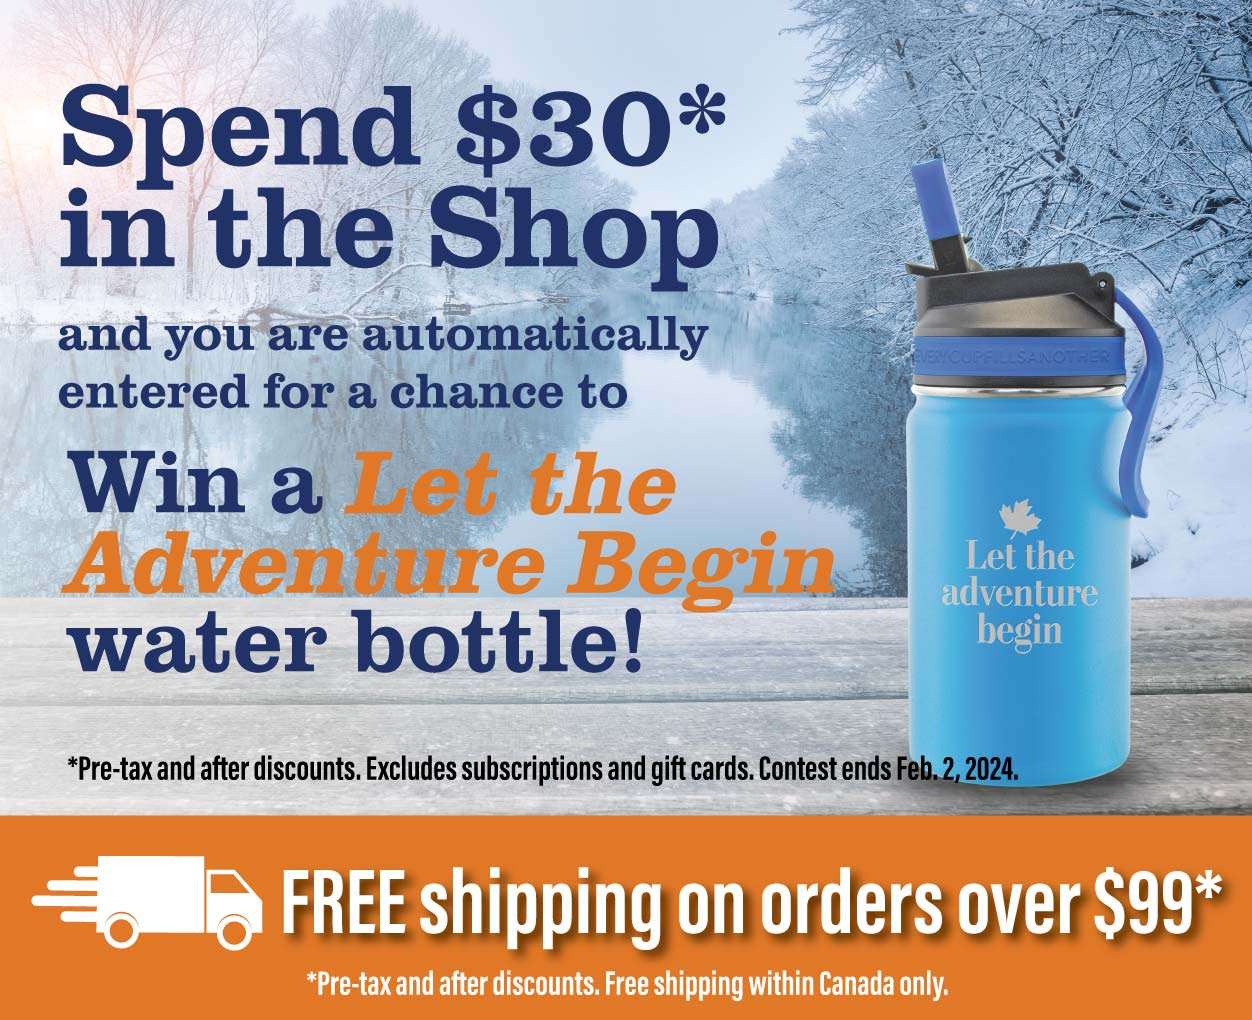 Spend $30* in the Shop and you are automatically entered for a chance to Win a Let the Adventure Begin water bottle!